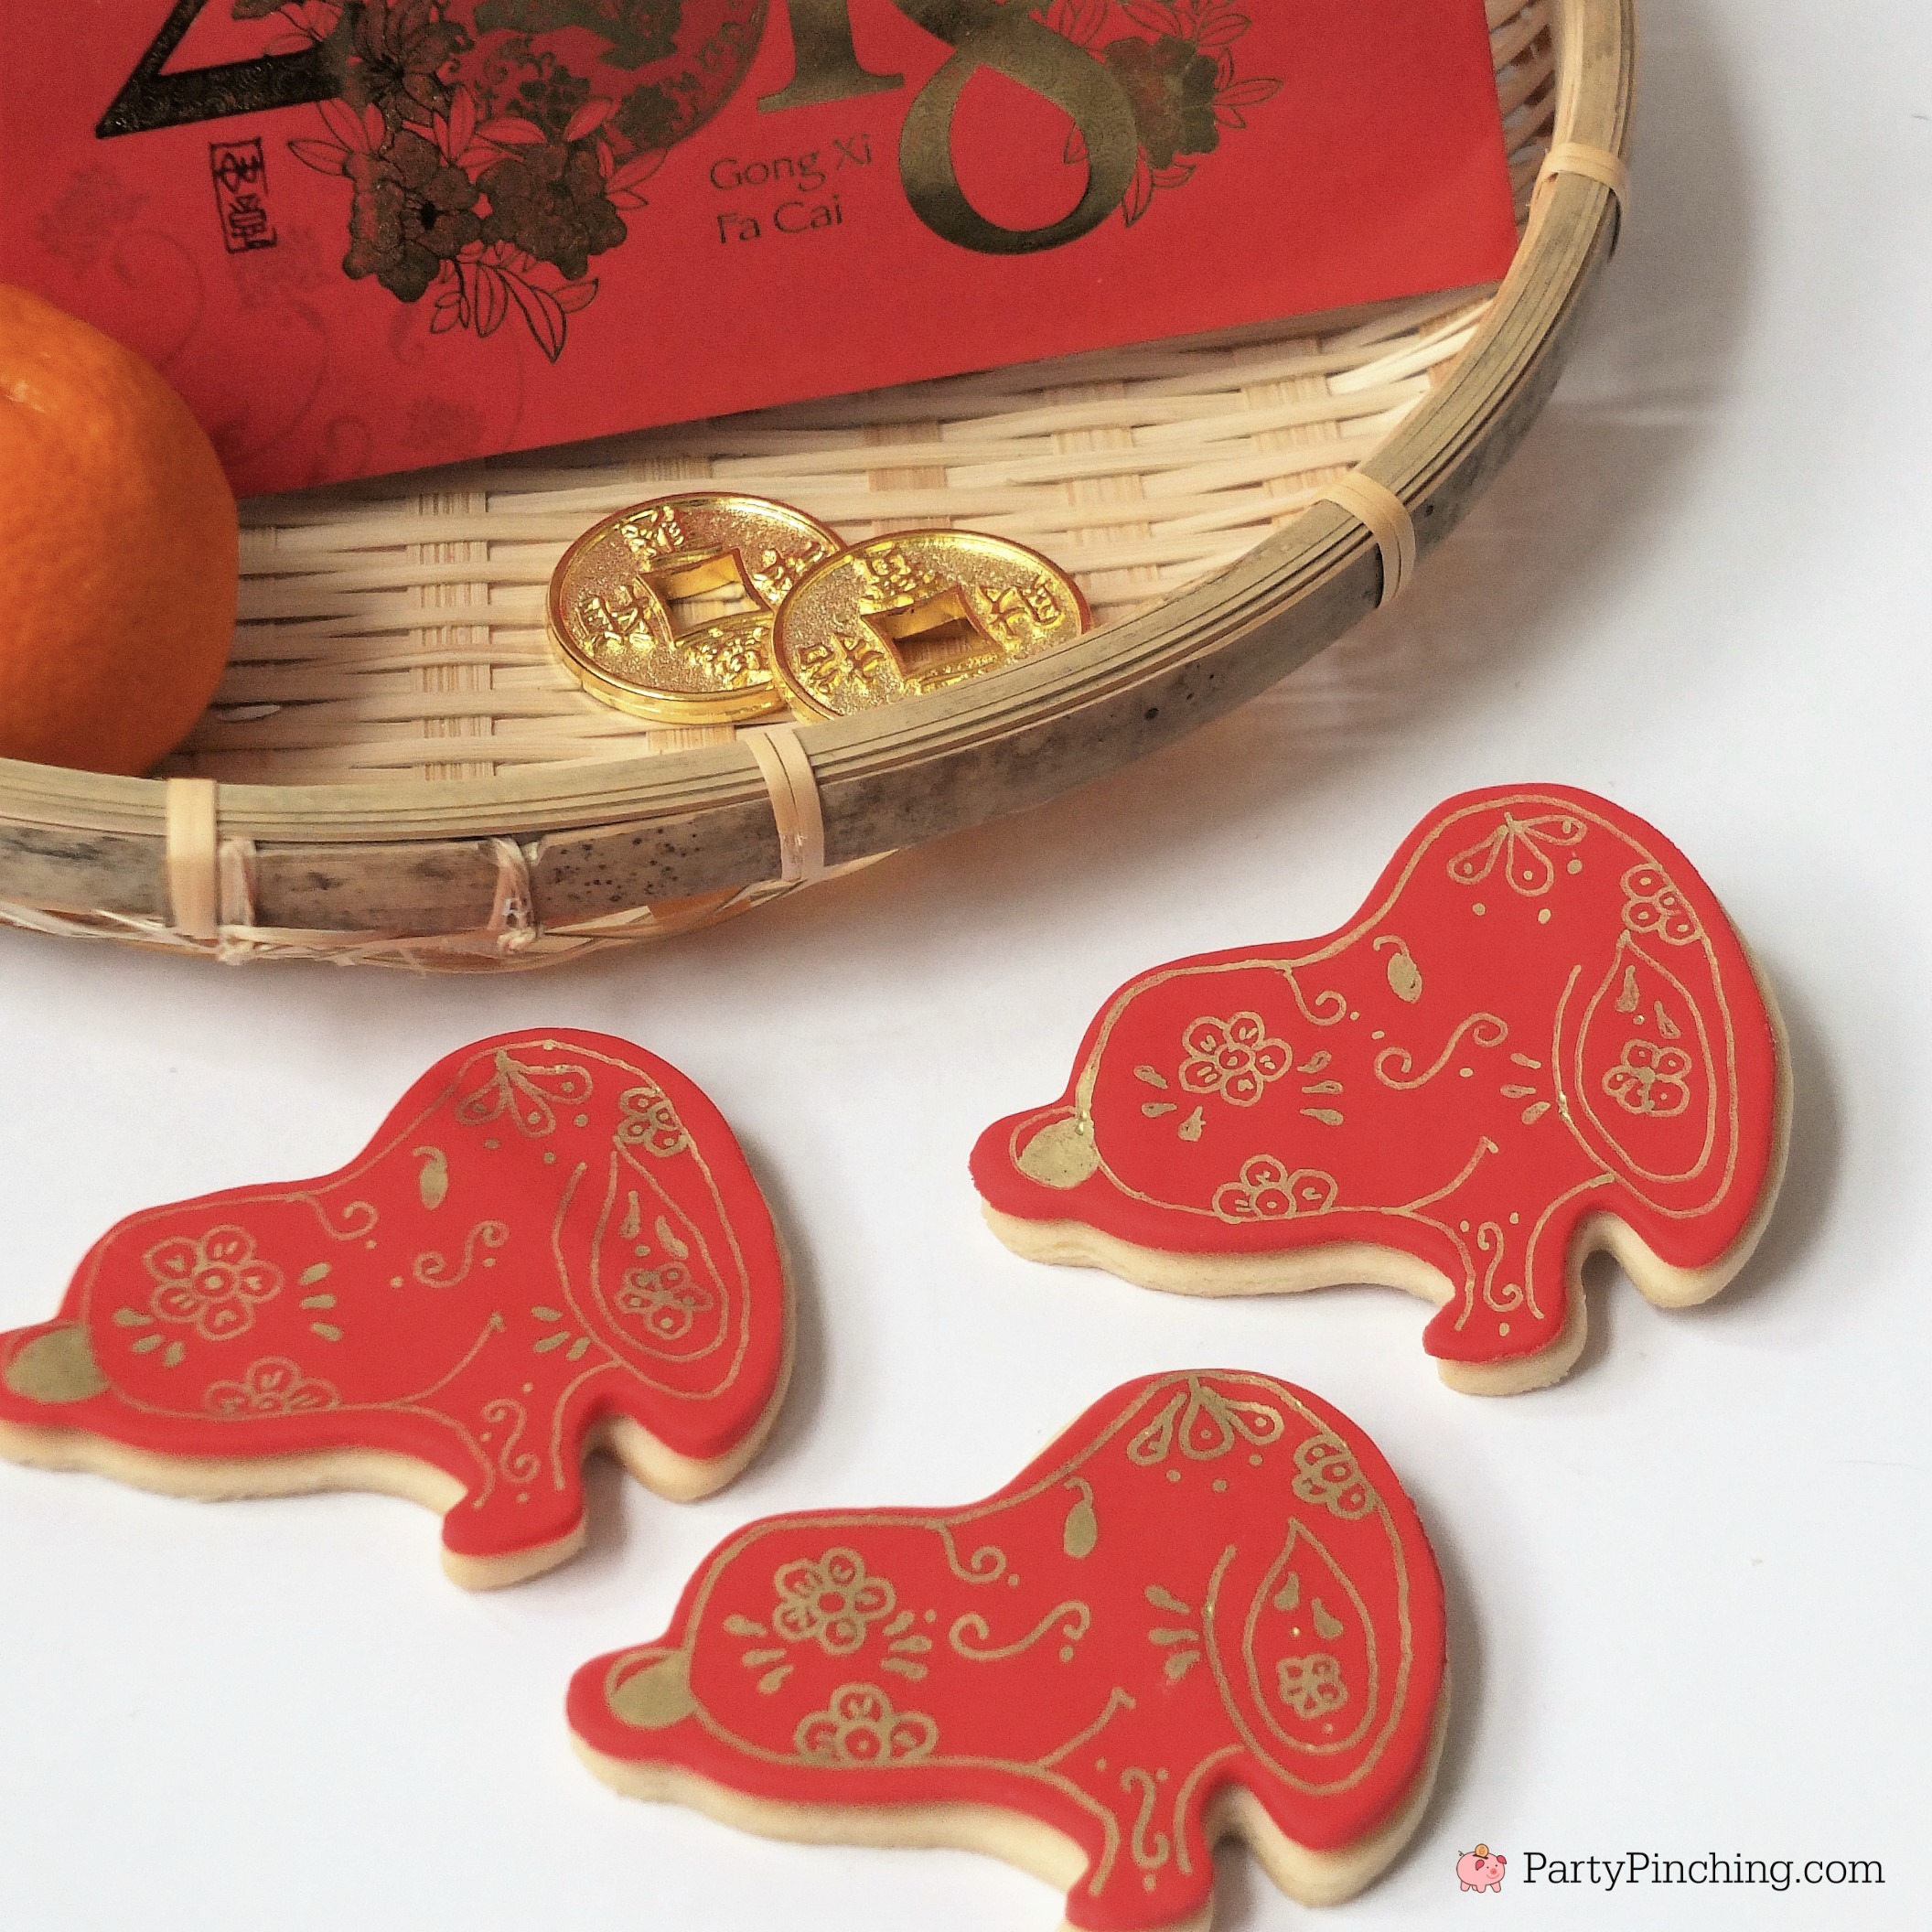 Lunar New Year, Chinese New Year, Year of the Dog, Snoopy cookies, Peanuts Cookies, Red and gold cookies, dessert ideas for Chinese New Year, Dog cookies, pretty celebration cookies, painted cookies